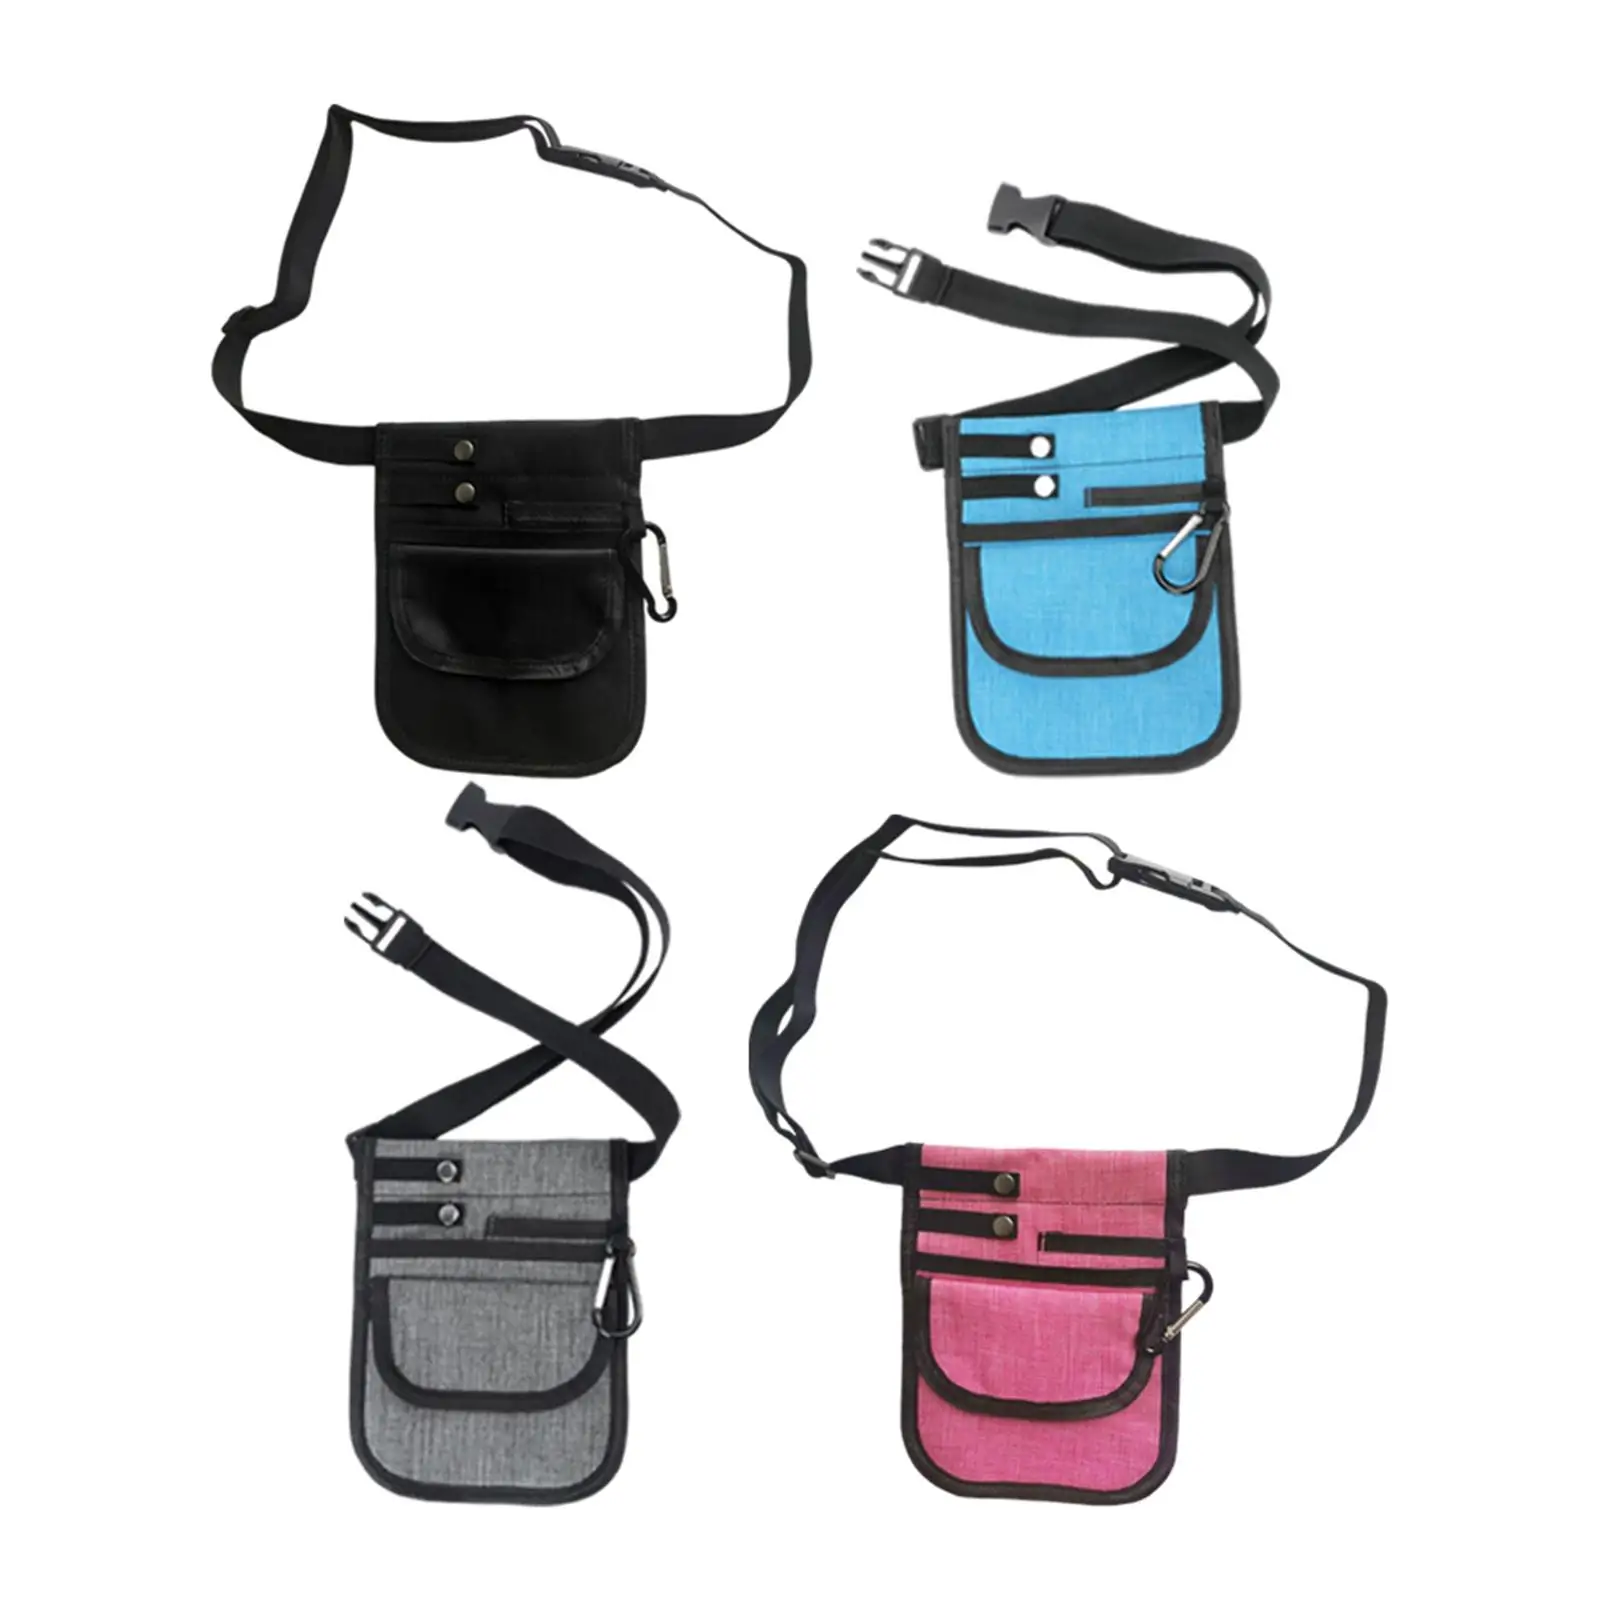 Fanny Pack Organizer Pouch Tool belt pocket Adjustable Strap Multi Compartment Utility Hip Bag for Student   Calculator